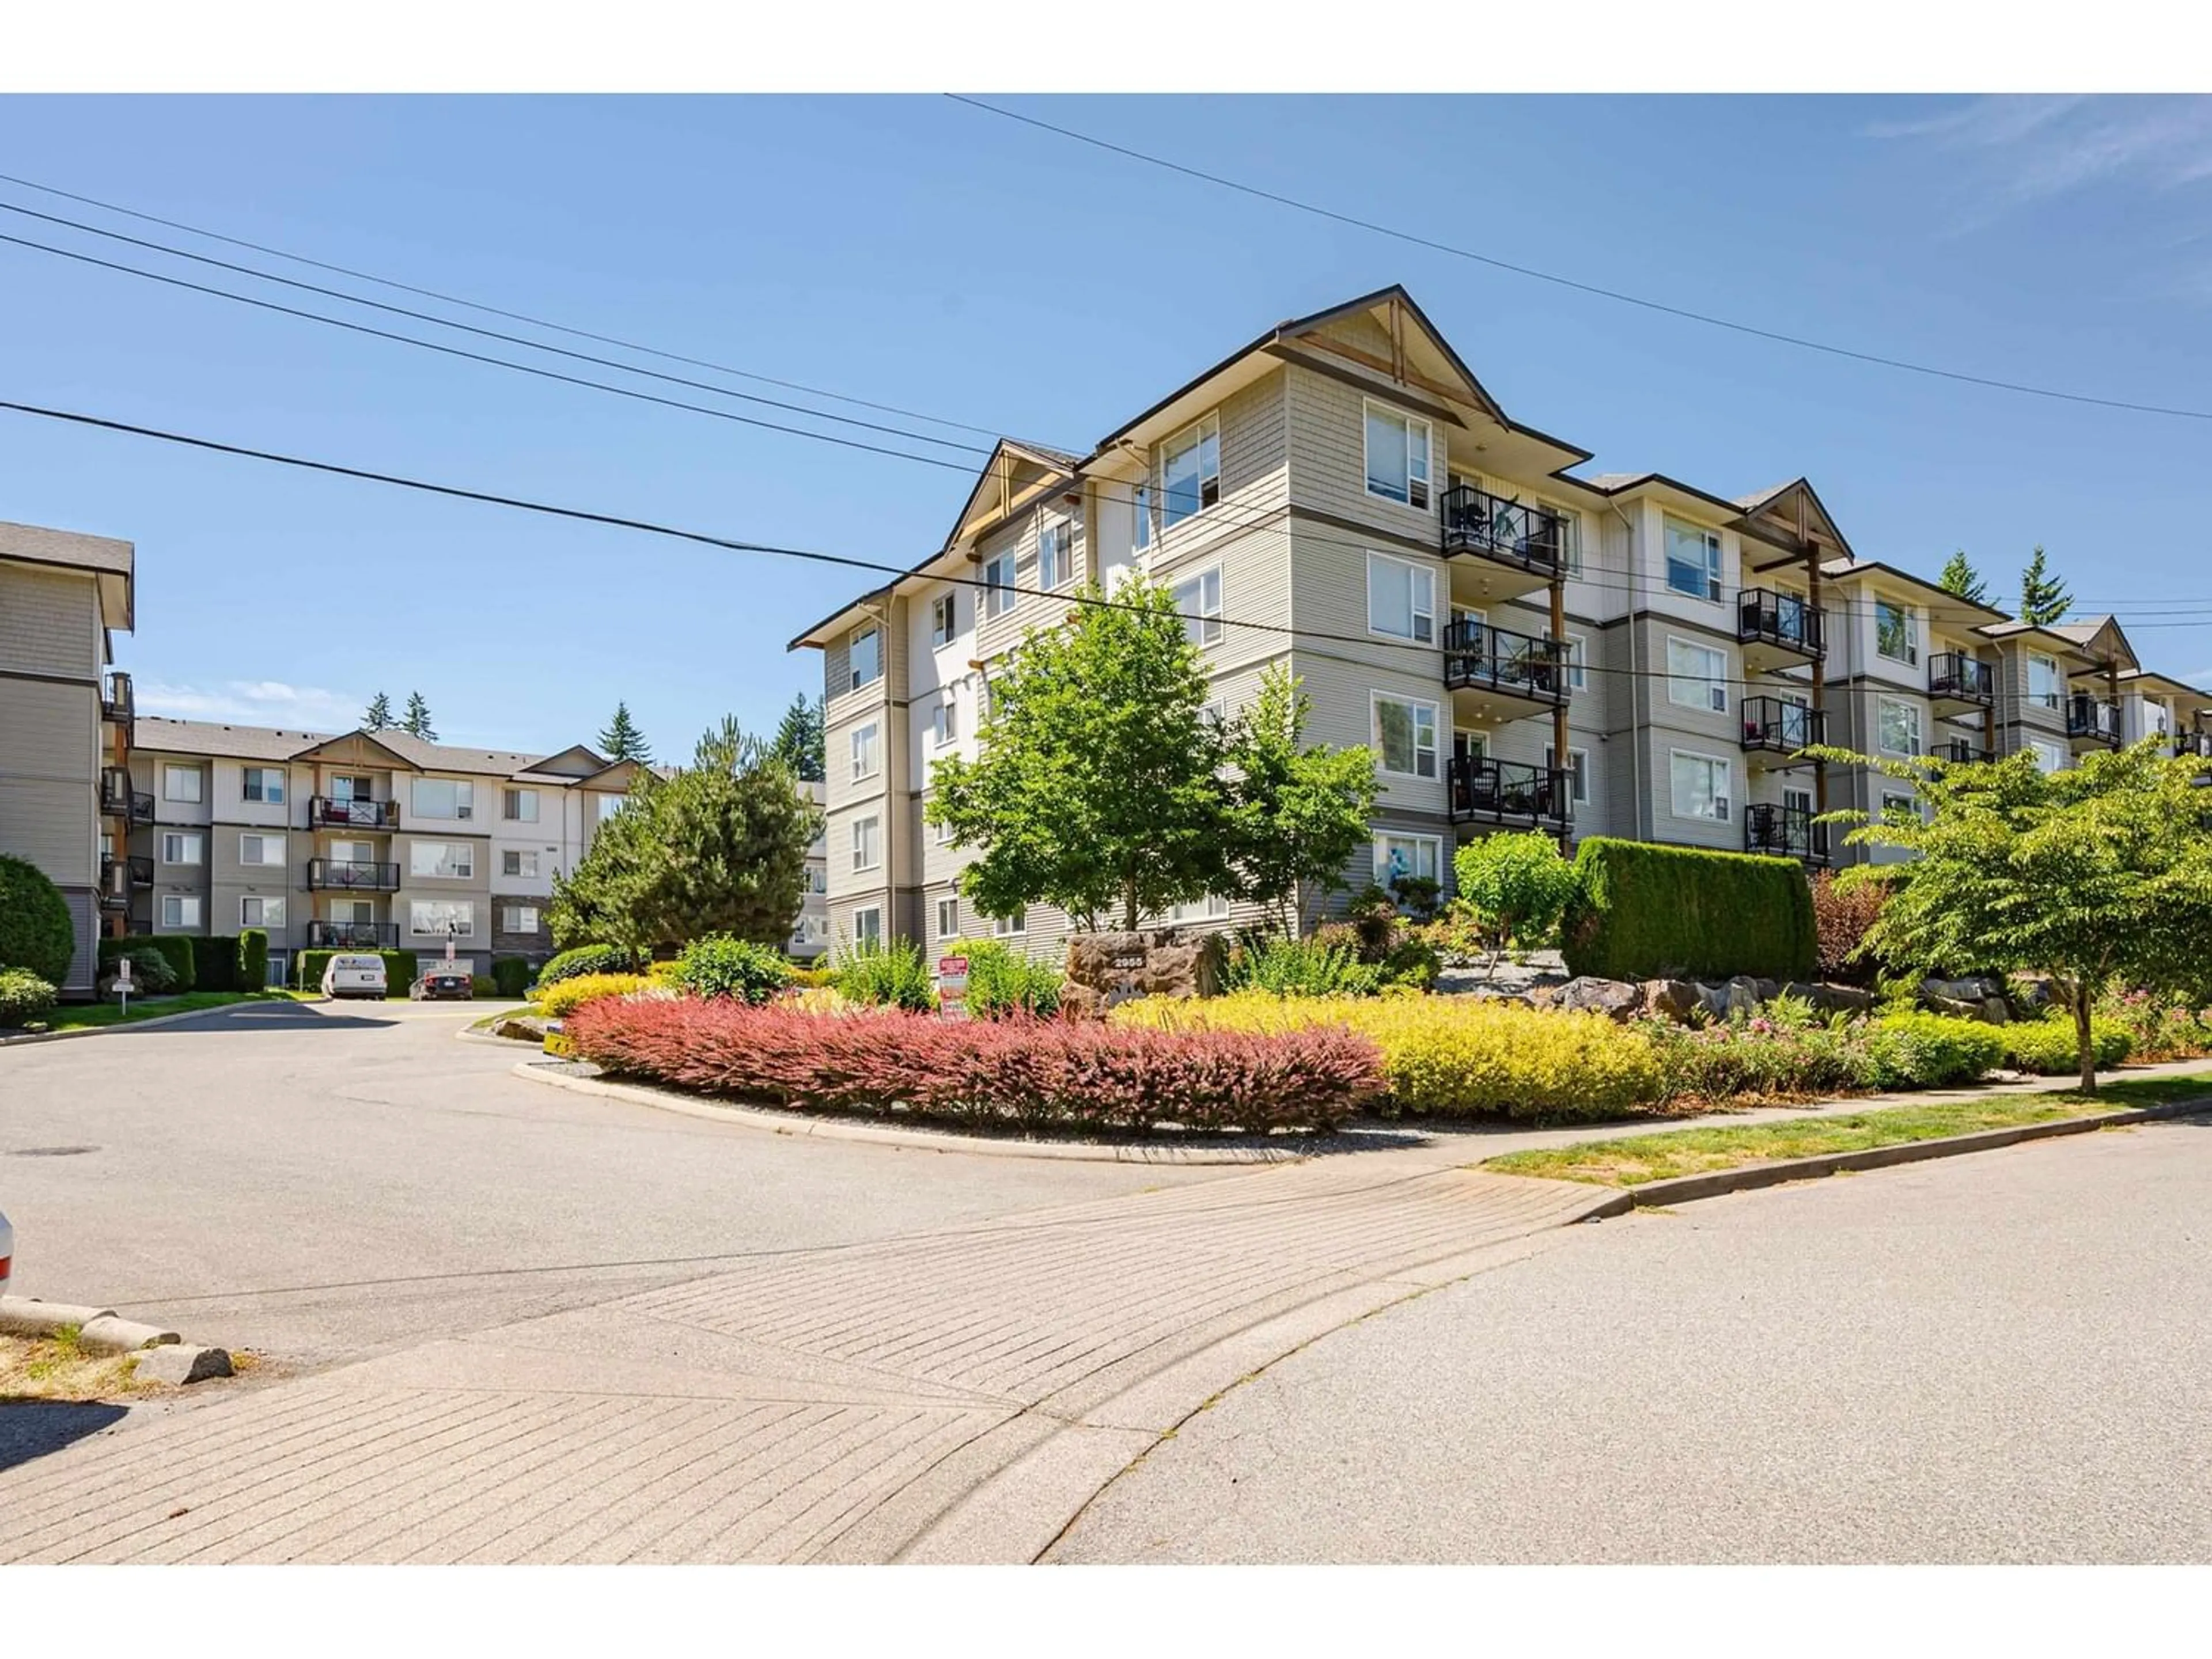 A pic from exterior of the house or condo for 313 2990 BOULDER STREET, Abbotsford British Columbia V2T3P8